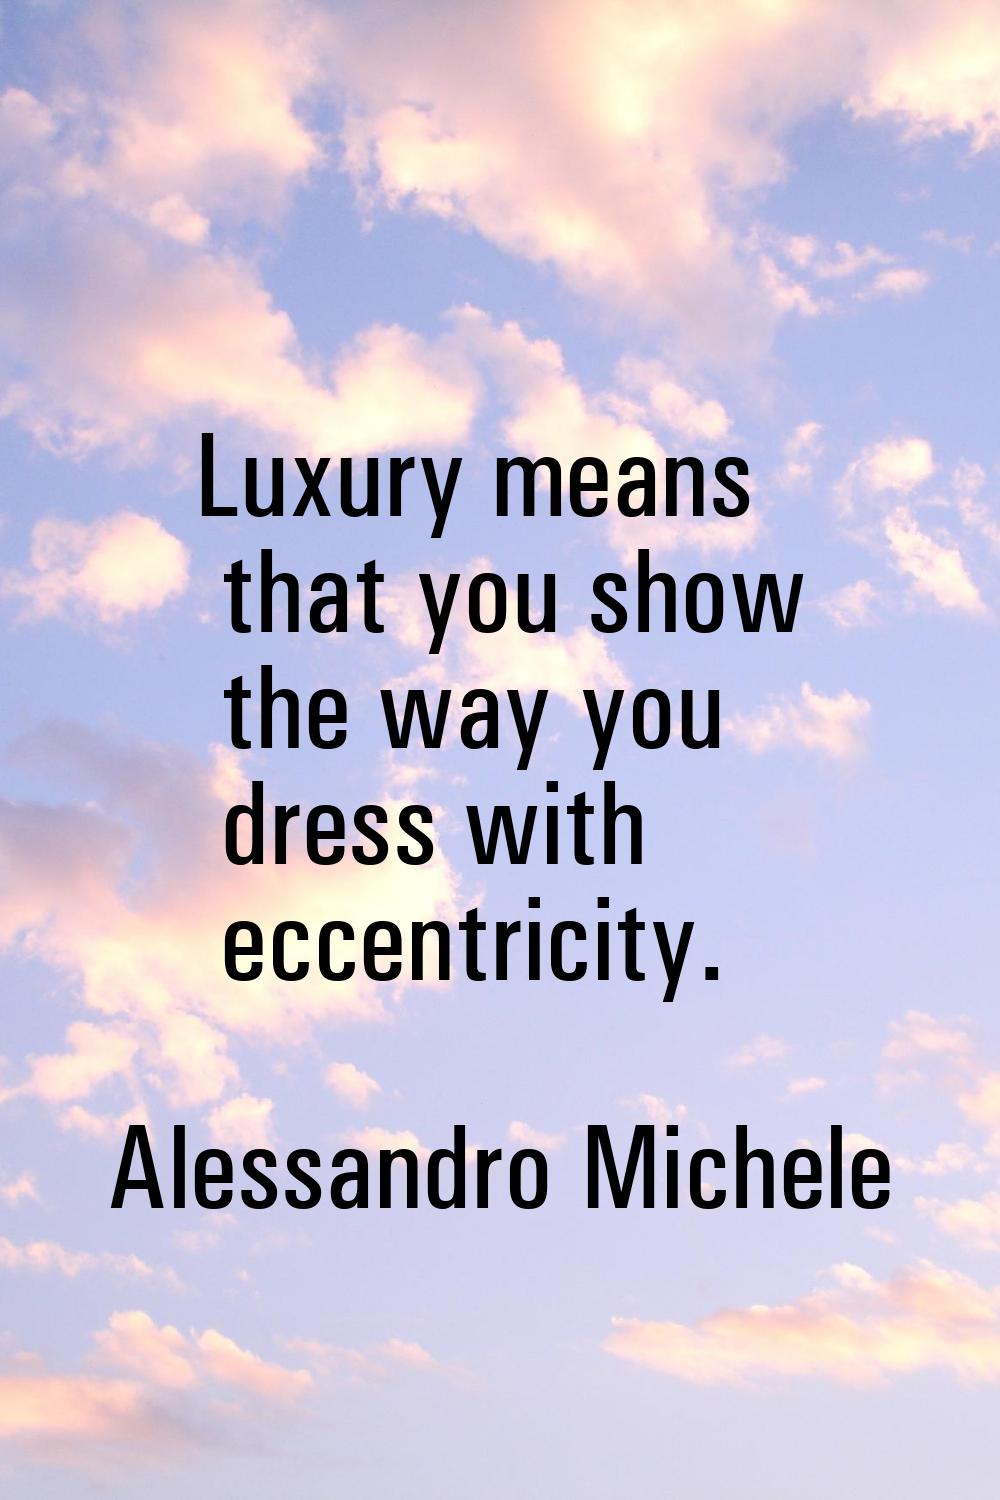 Luxury means that you show the way you dress with eccentricity.